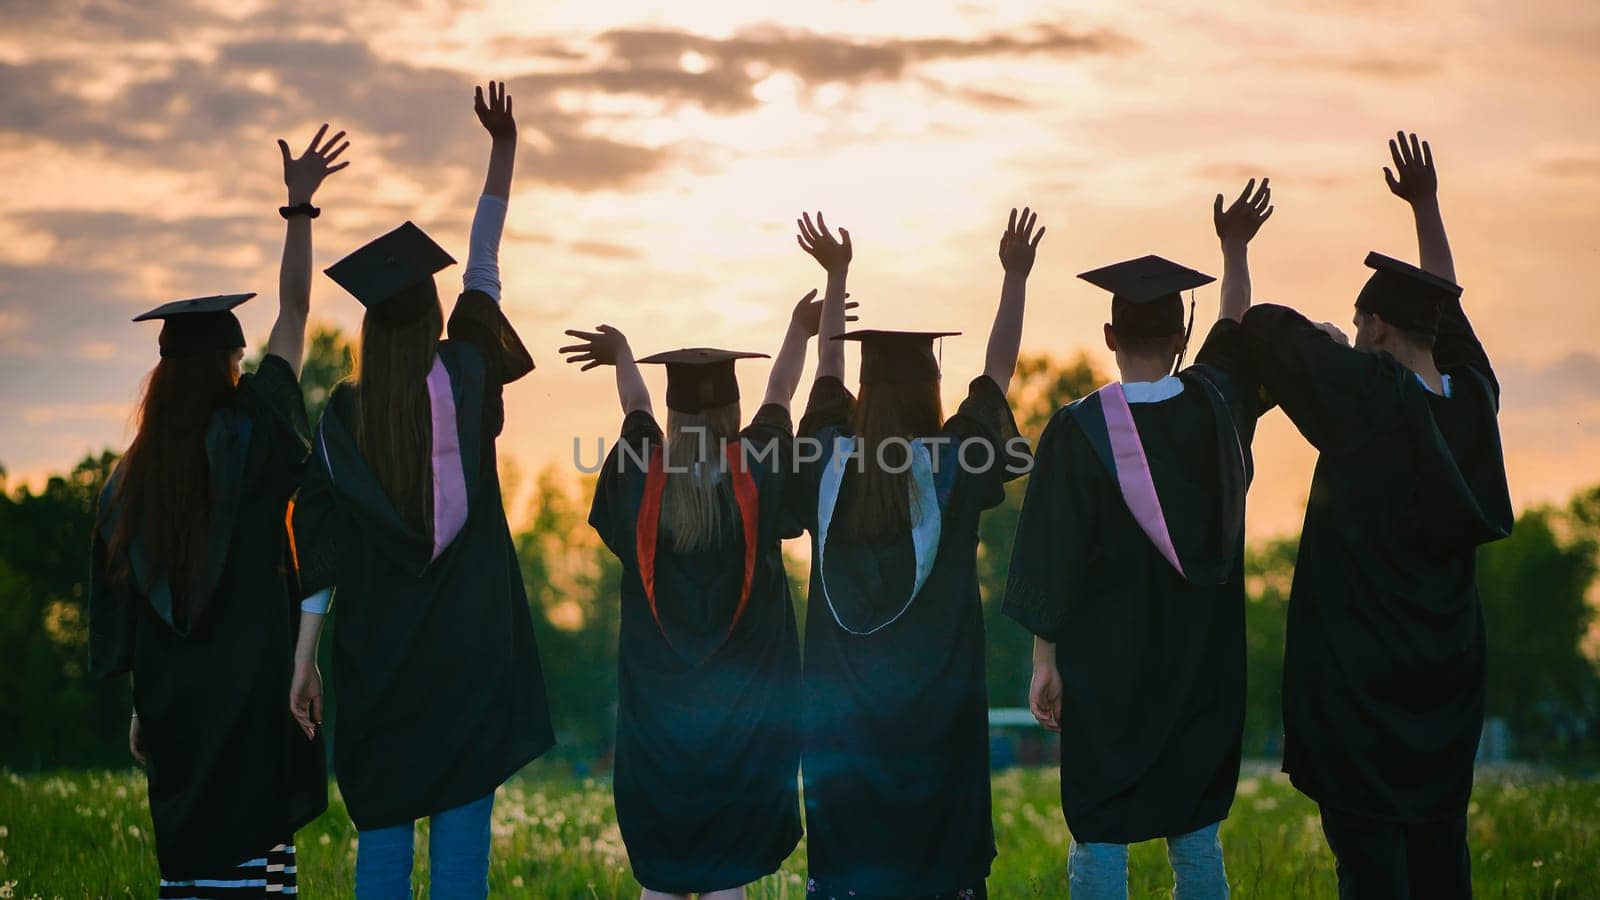 Silhouettes of graduates in black robes waving their arms against the evening sunset